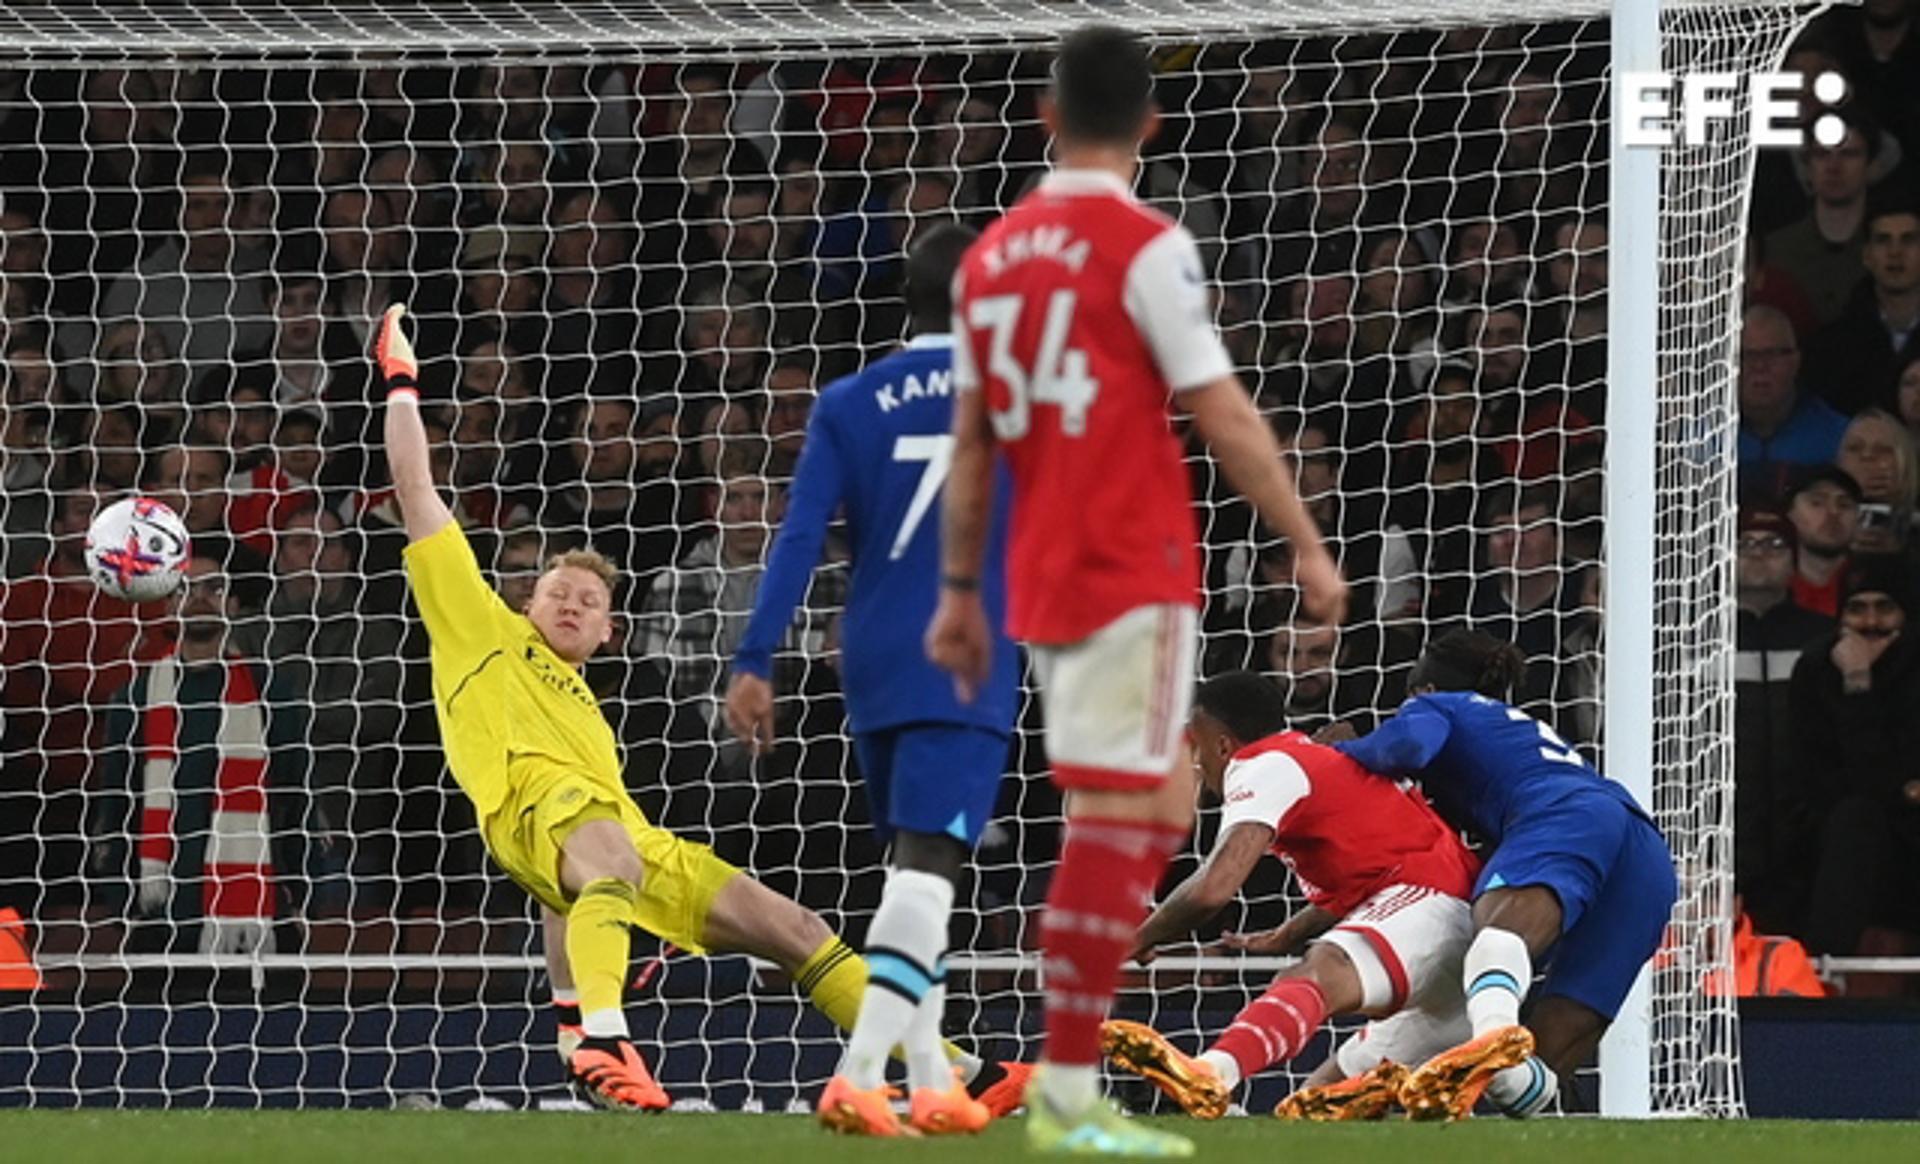 Chelsea's Noni Madueke (R in blue) scores against Arsenal during a Premier League match in London on 2 May 2023. EFE/EPA/NEIL HALL EDITORIAL USE ONLY. No use with unauthorized audio, video, data, fixture lists, club/league logos or 'live' services. Online in-match use limited to 120 images, no video emulation. No use in betting, games or single club/league/player publications.
